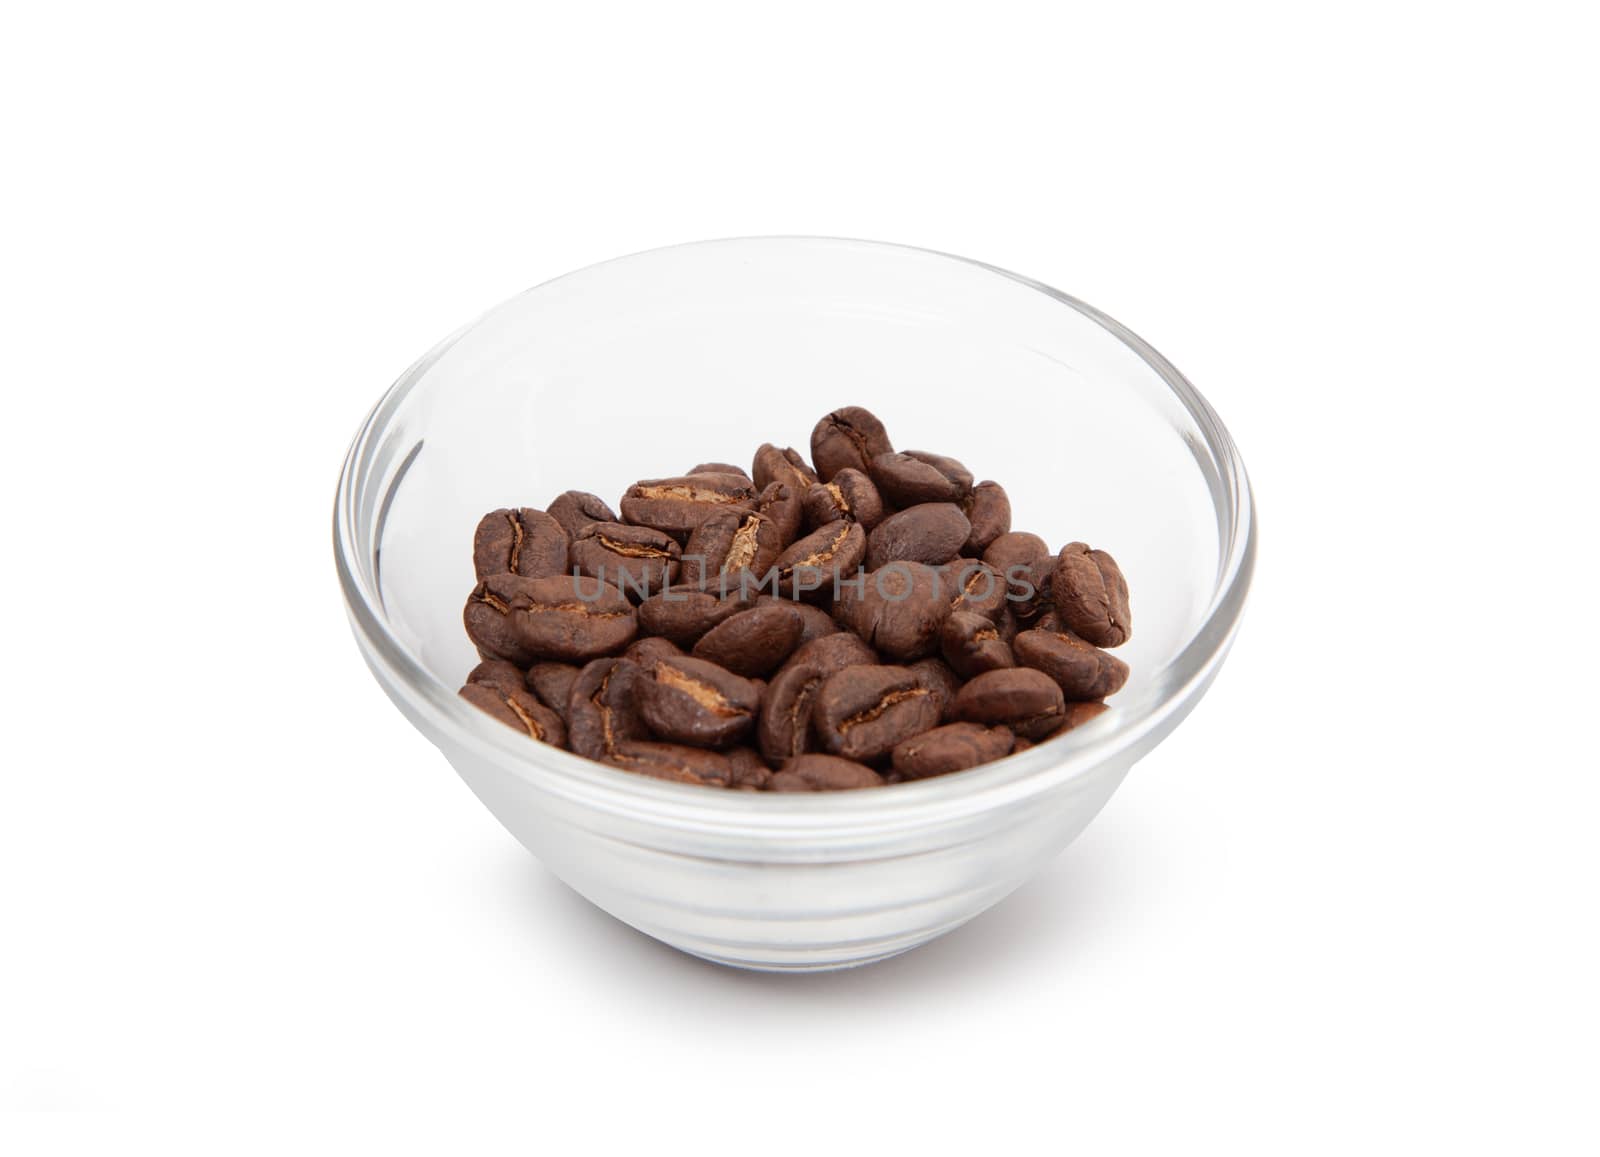 Roasted coffee beans in a glass bowl. Isolated in white background. Close up